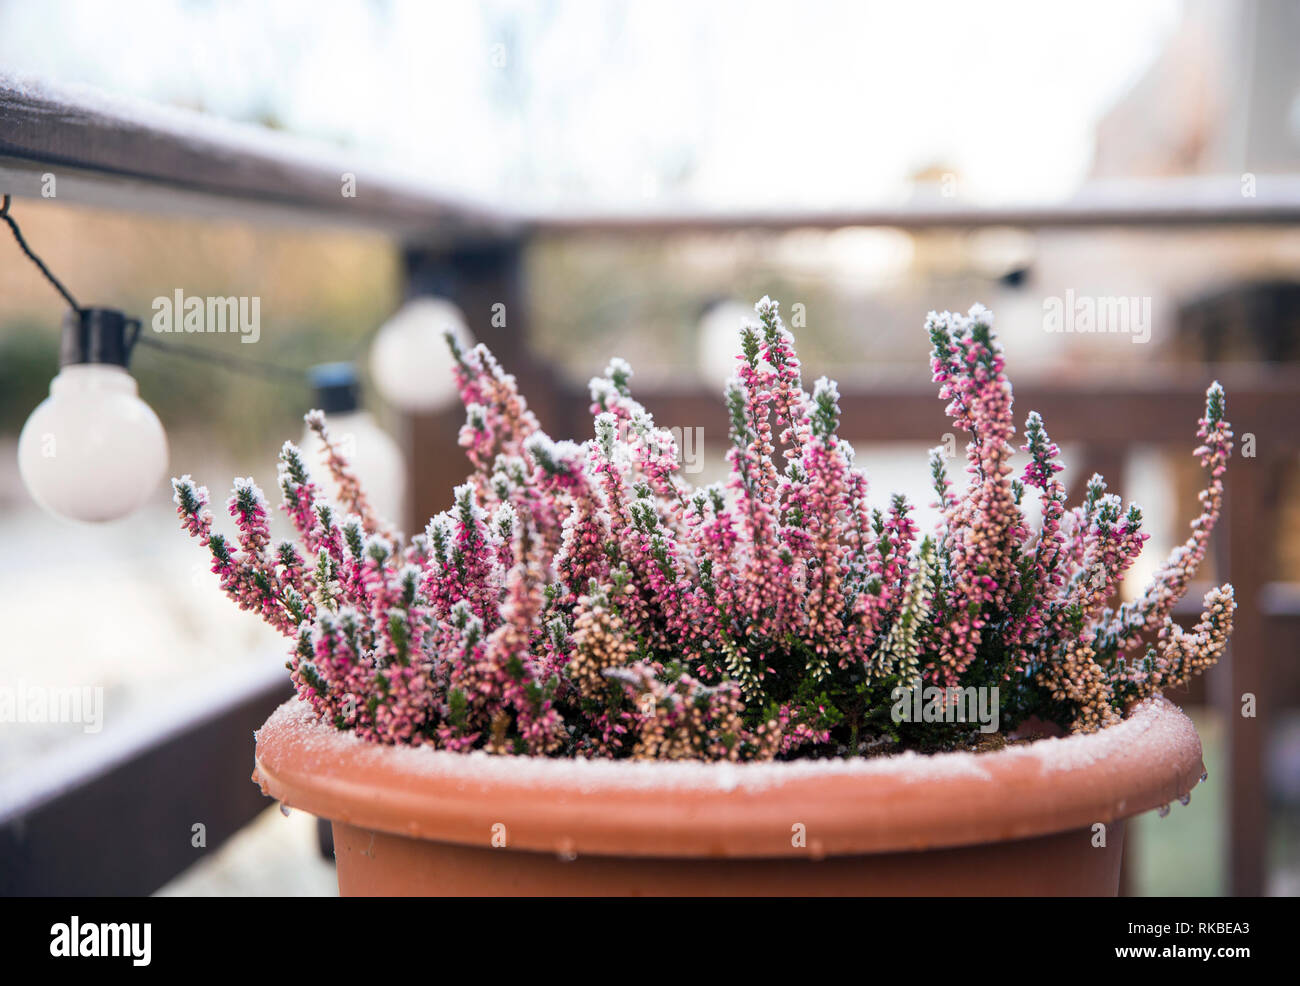 Pink heather flower growing in terracotta color garden pot, outdoors on terrace in winter, covered with white frost. Stock Photo